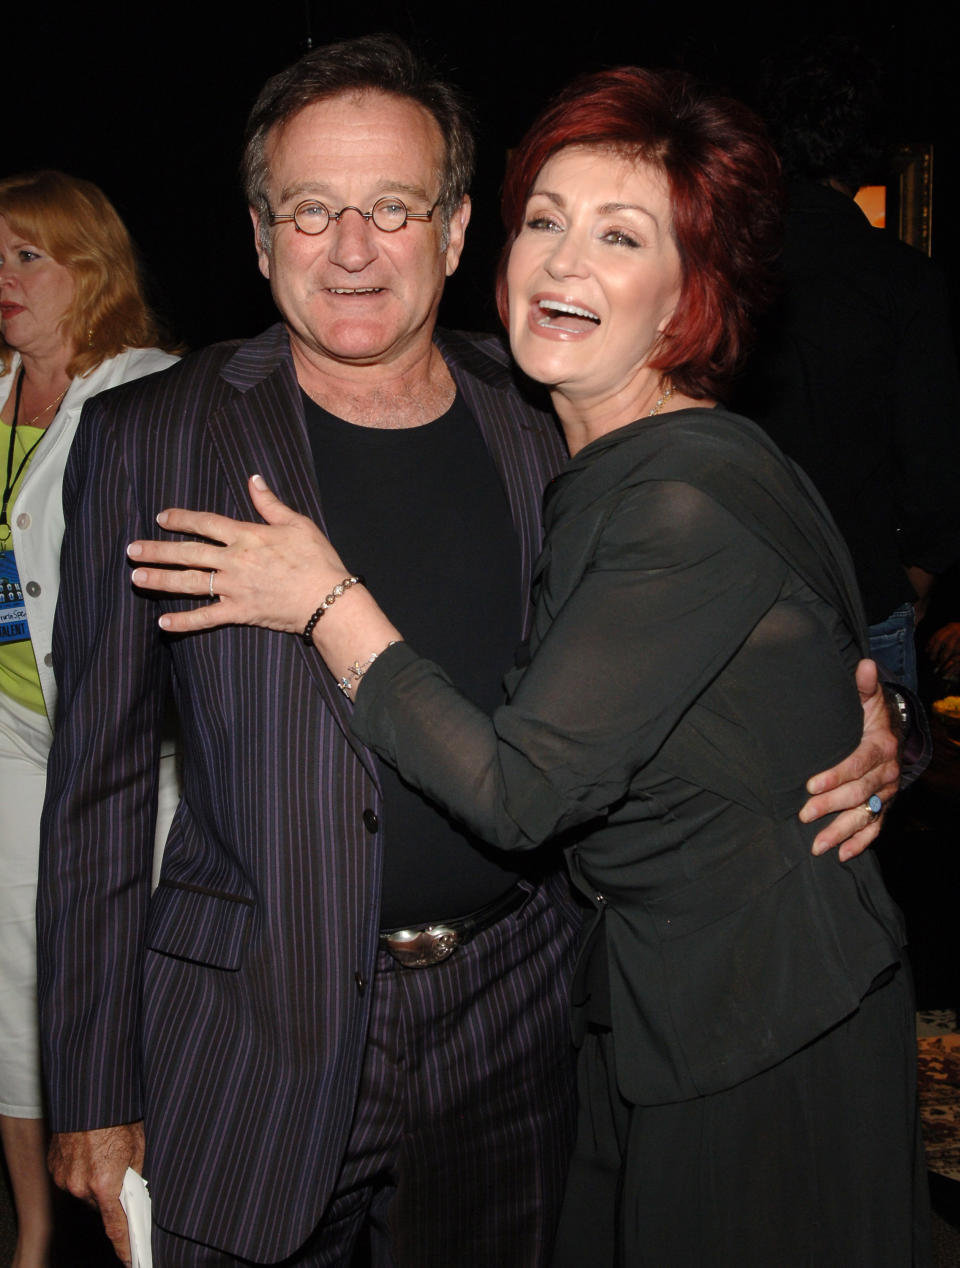 Robin Williams and Sharon Osbourne during 2007 VH1 Rock Honors - Green Room at Mandalay Bay in Las Vegas, Nevada, United States. (Photo by Jamie McCarthy/WireImage)